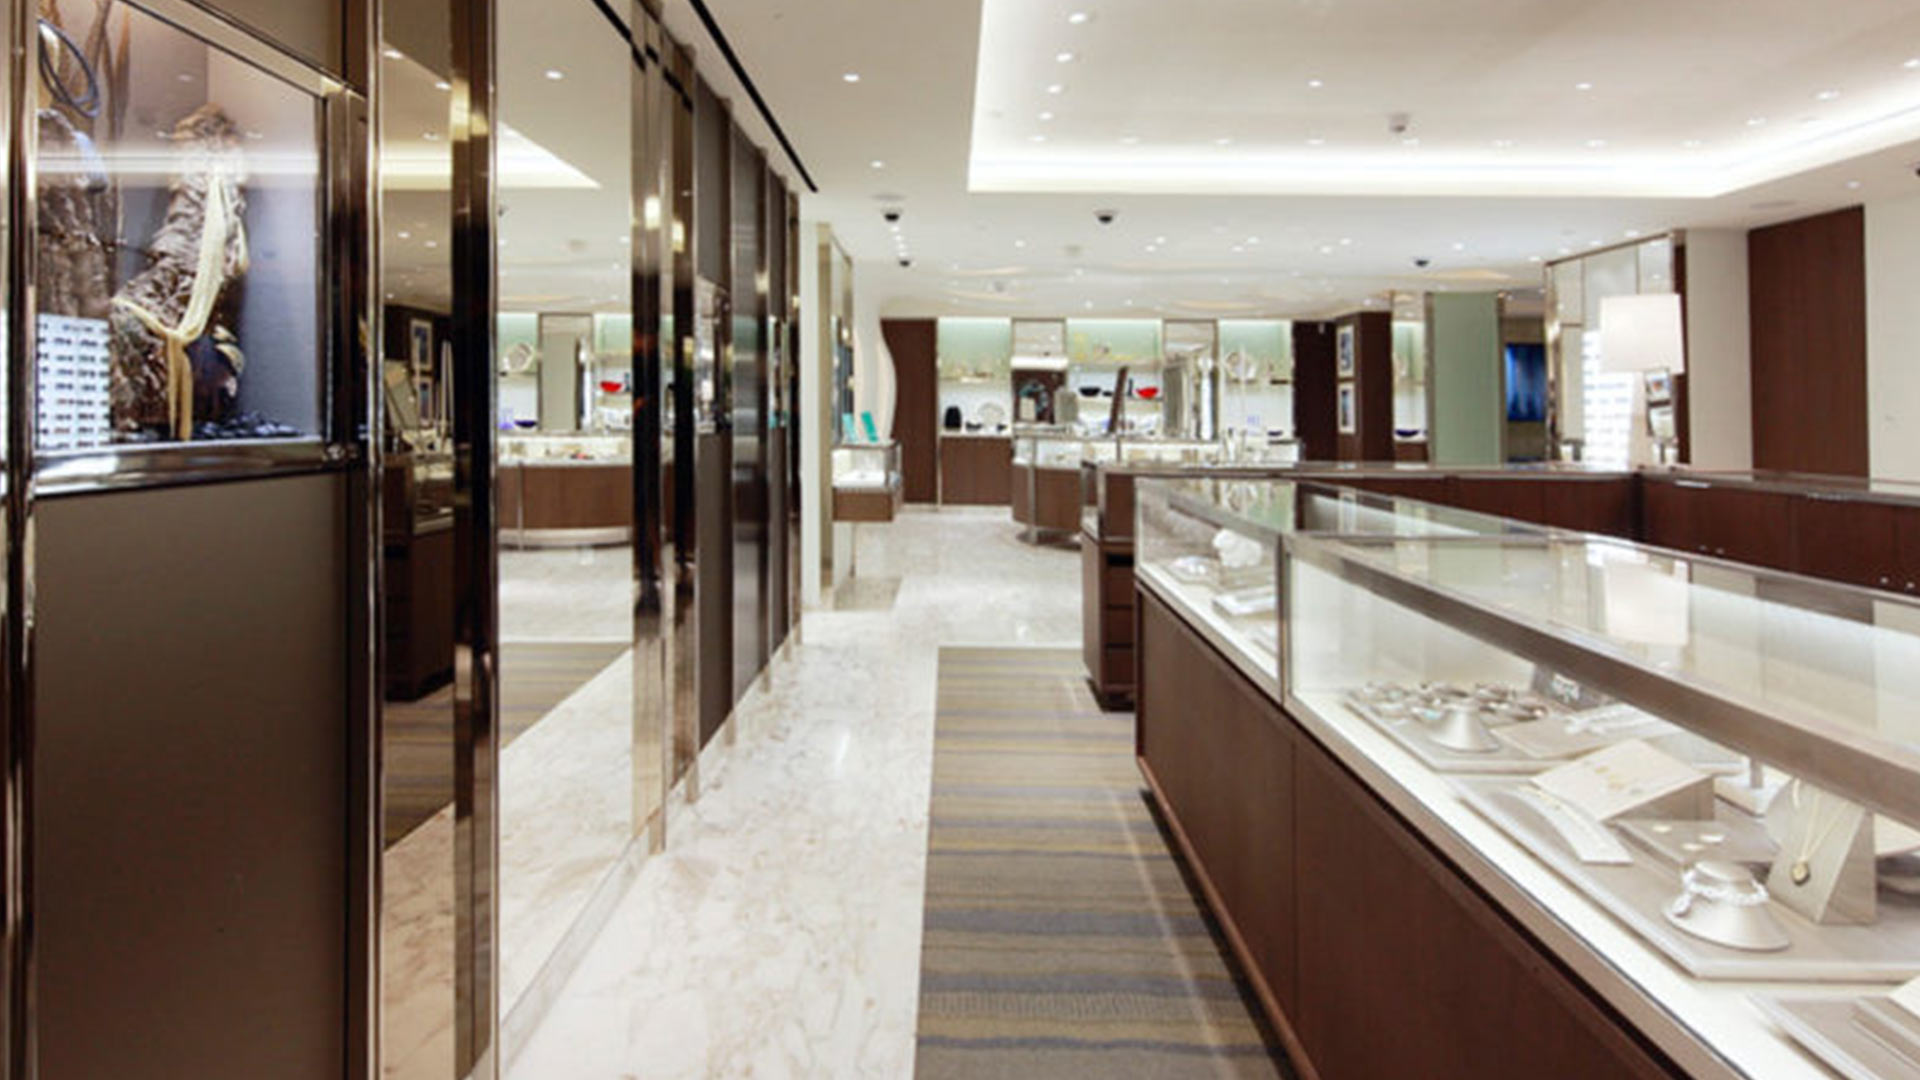 Implementation of Tiffany & Co stores in Europe